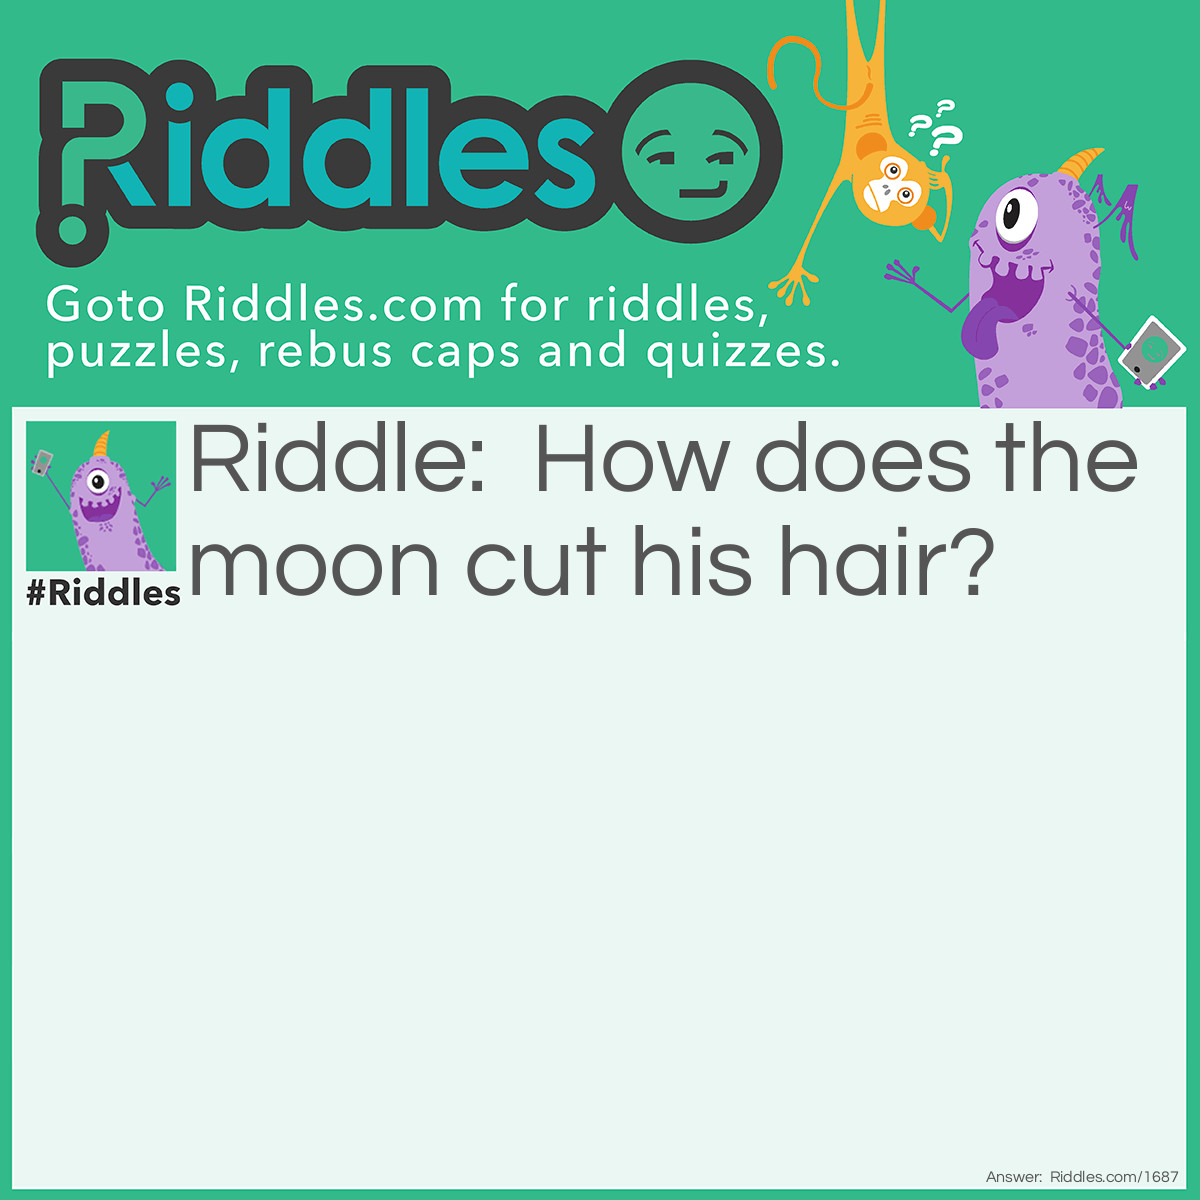 Riddle: How does the moon cut his hair? Answer: E-clipse it!